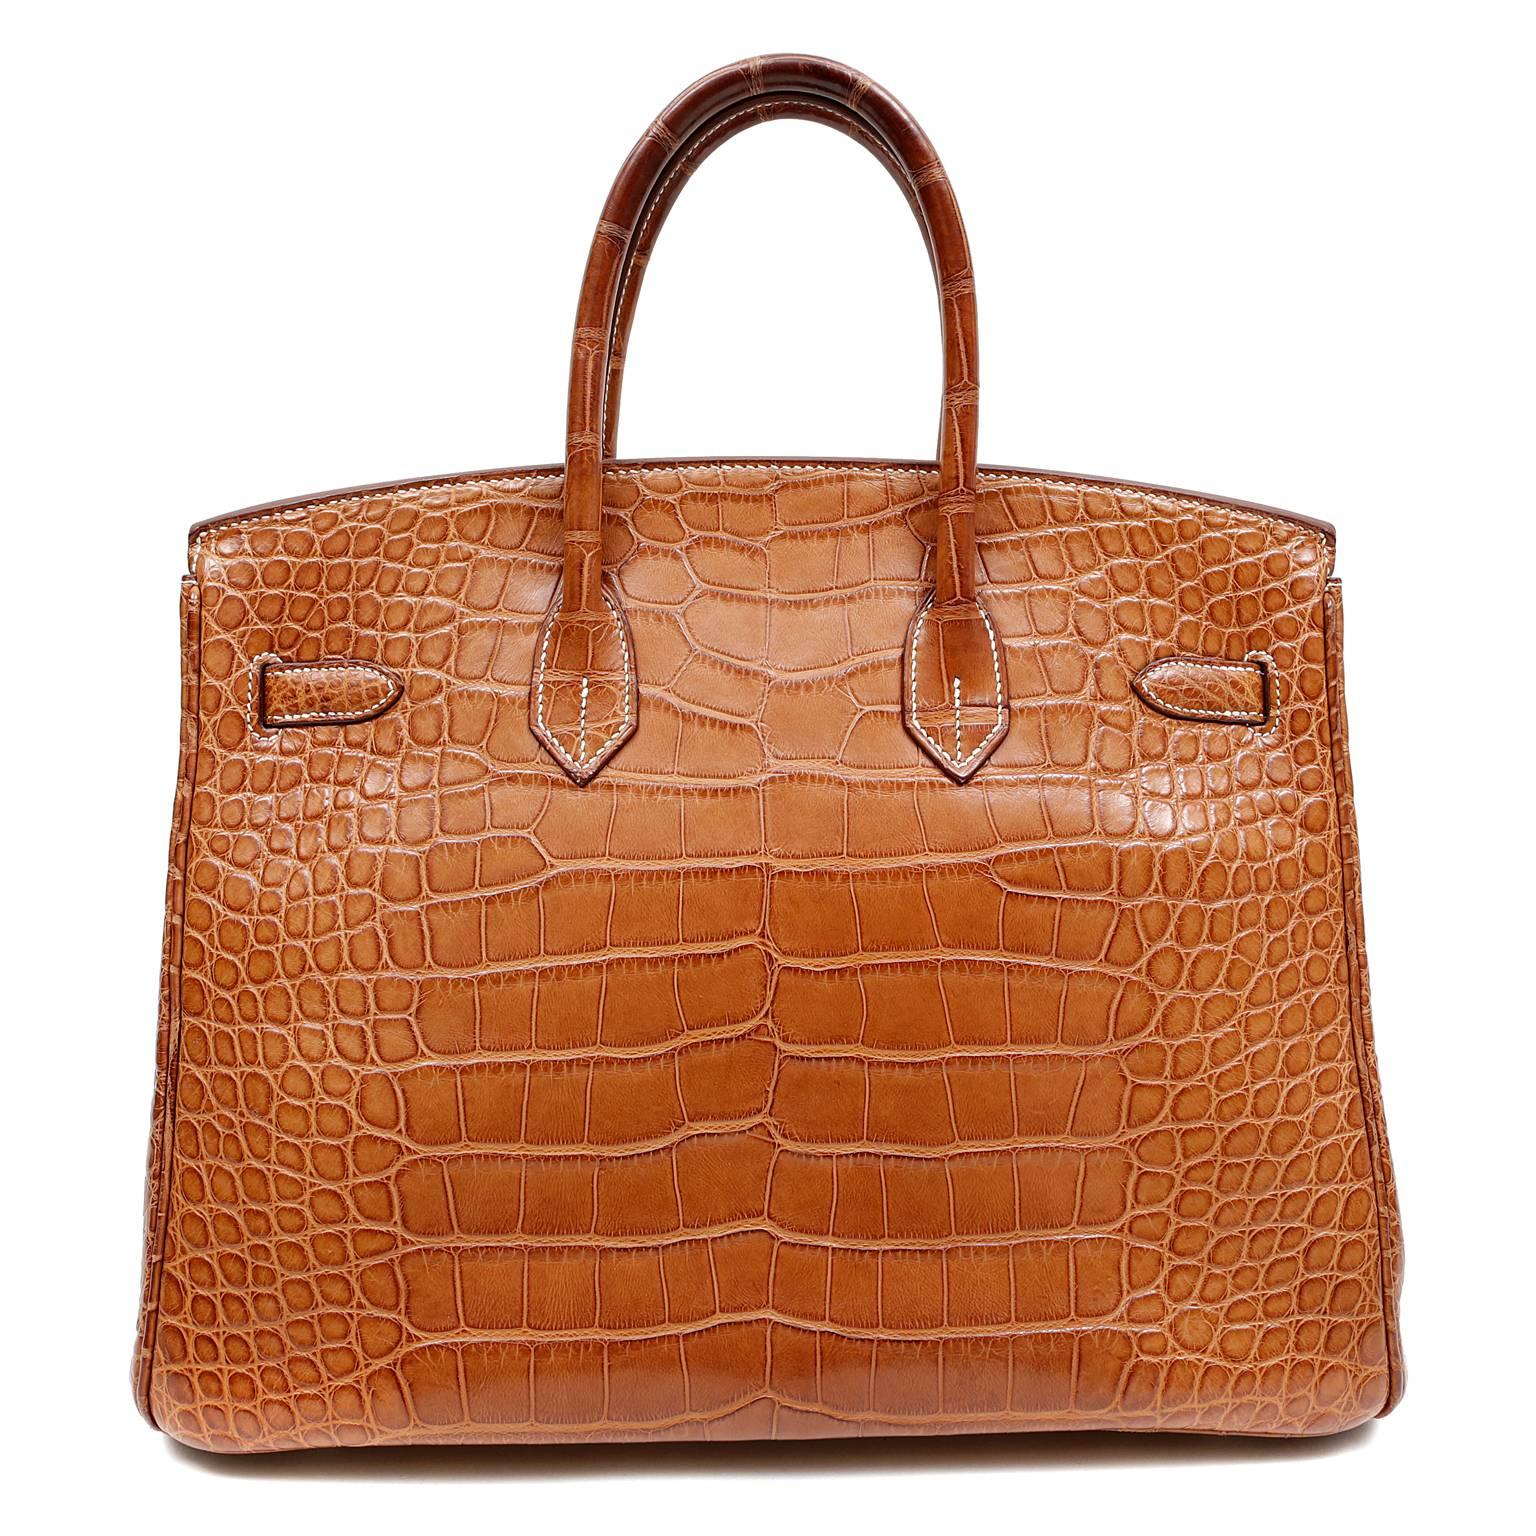 Hermès Gold Matte Alligator Birkin Bag, 35 cm- PRISTINE
   Hermès bags are considered the ultimate luxury item the world over.  Hand stitched by skilled craftsmen, wait lists of a year or more are commonplace for the leather versions.  An exotic